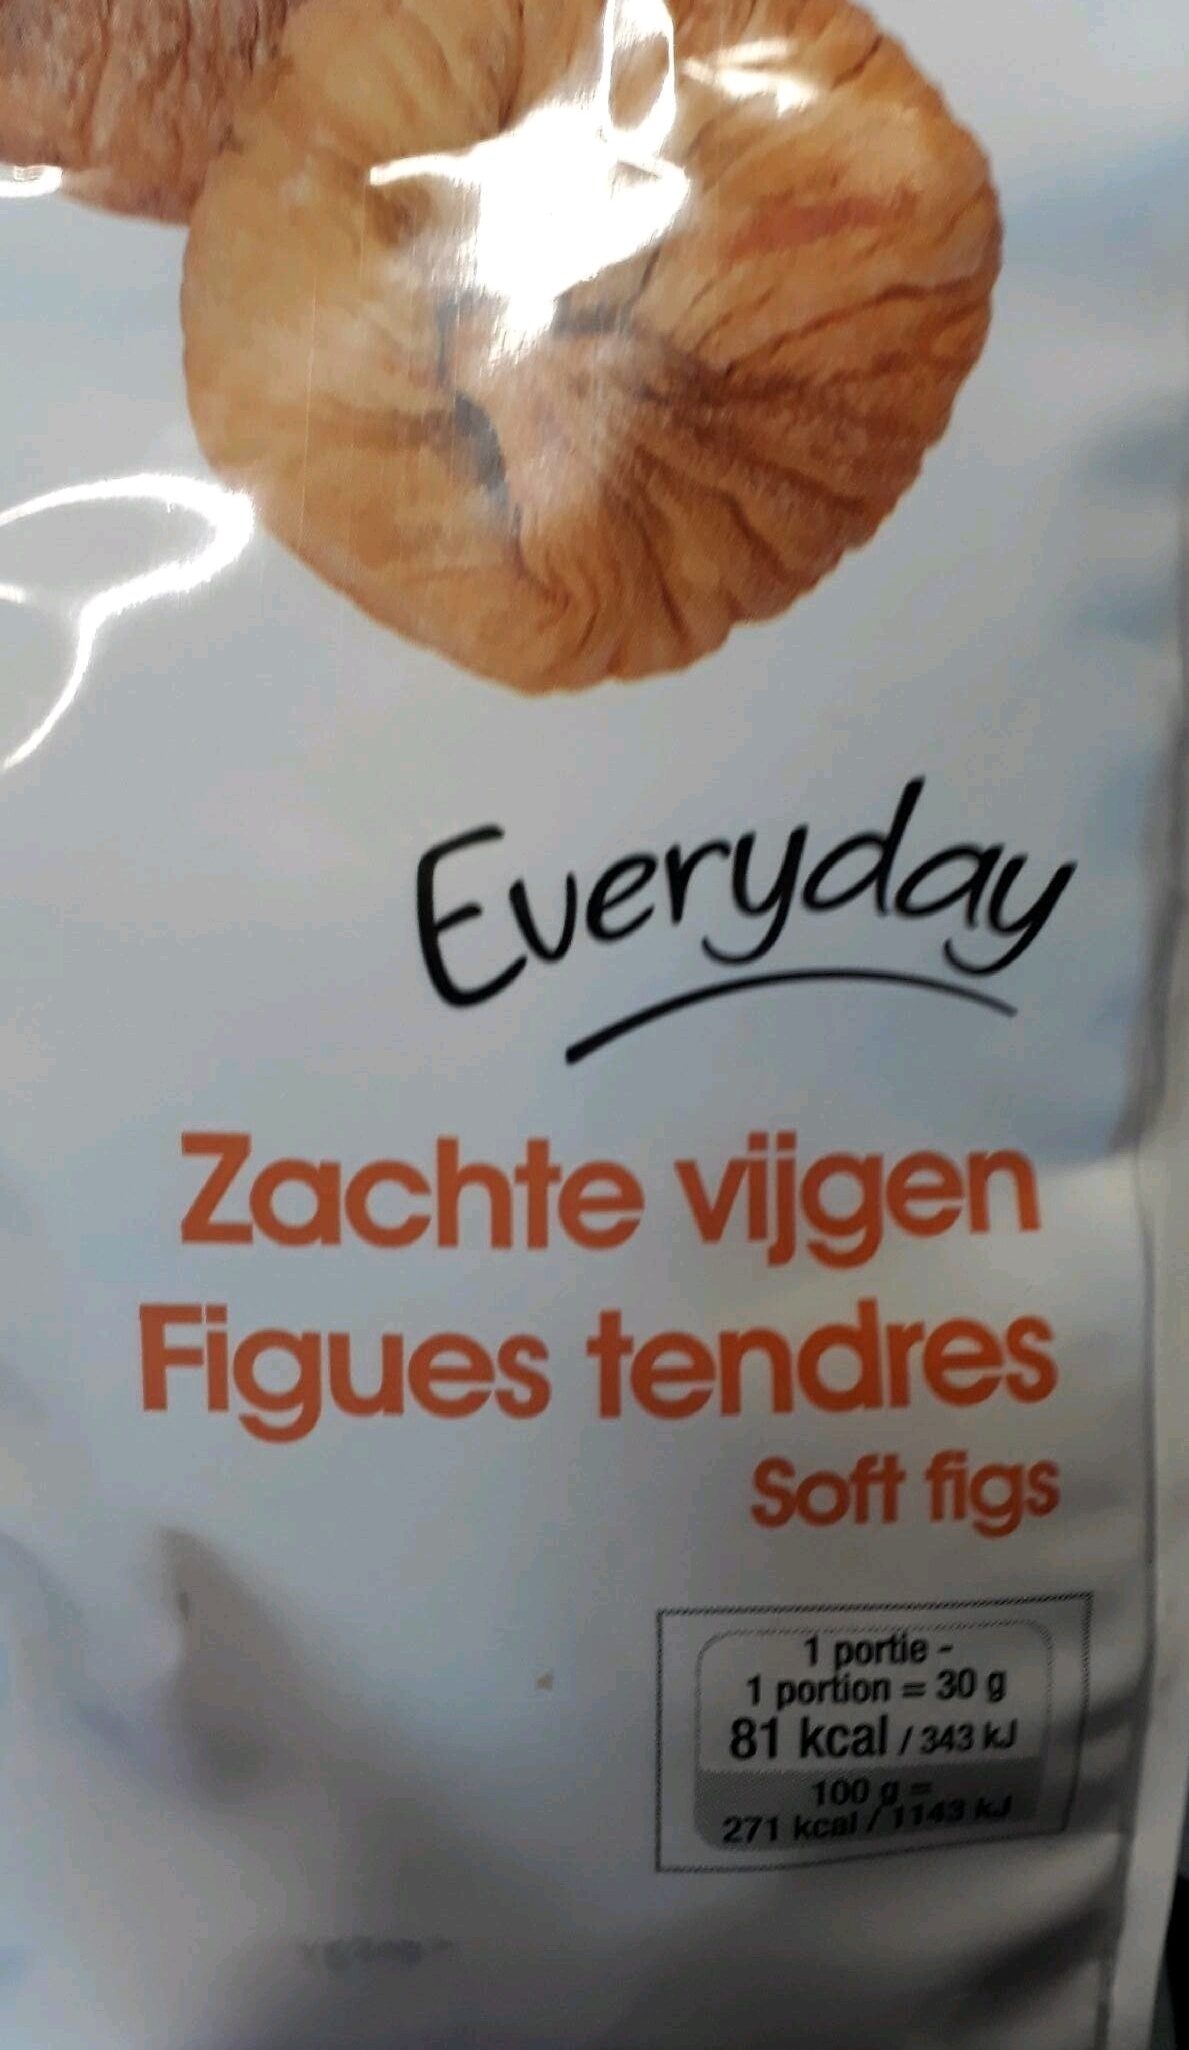 Figues tendres - Product